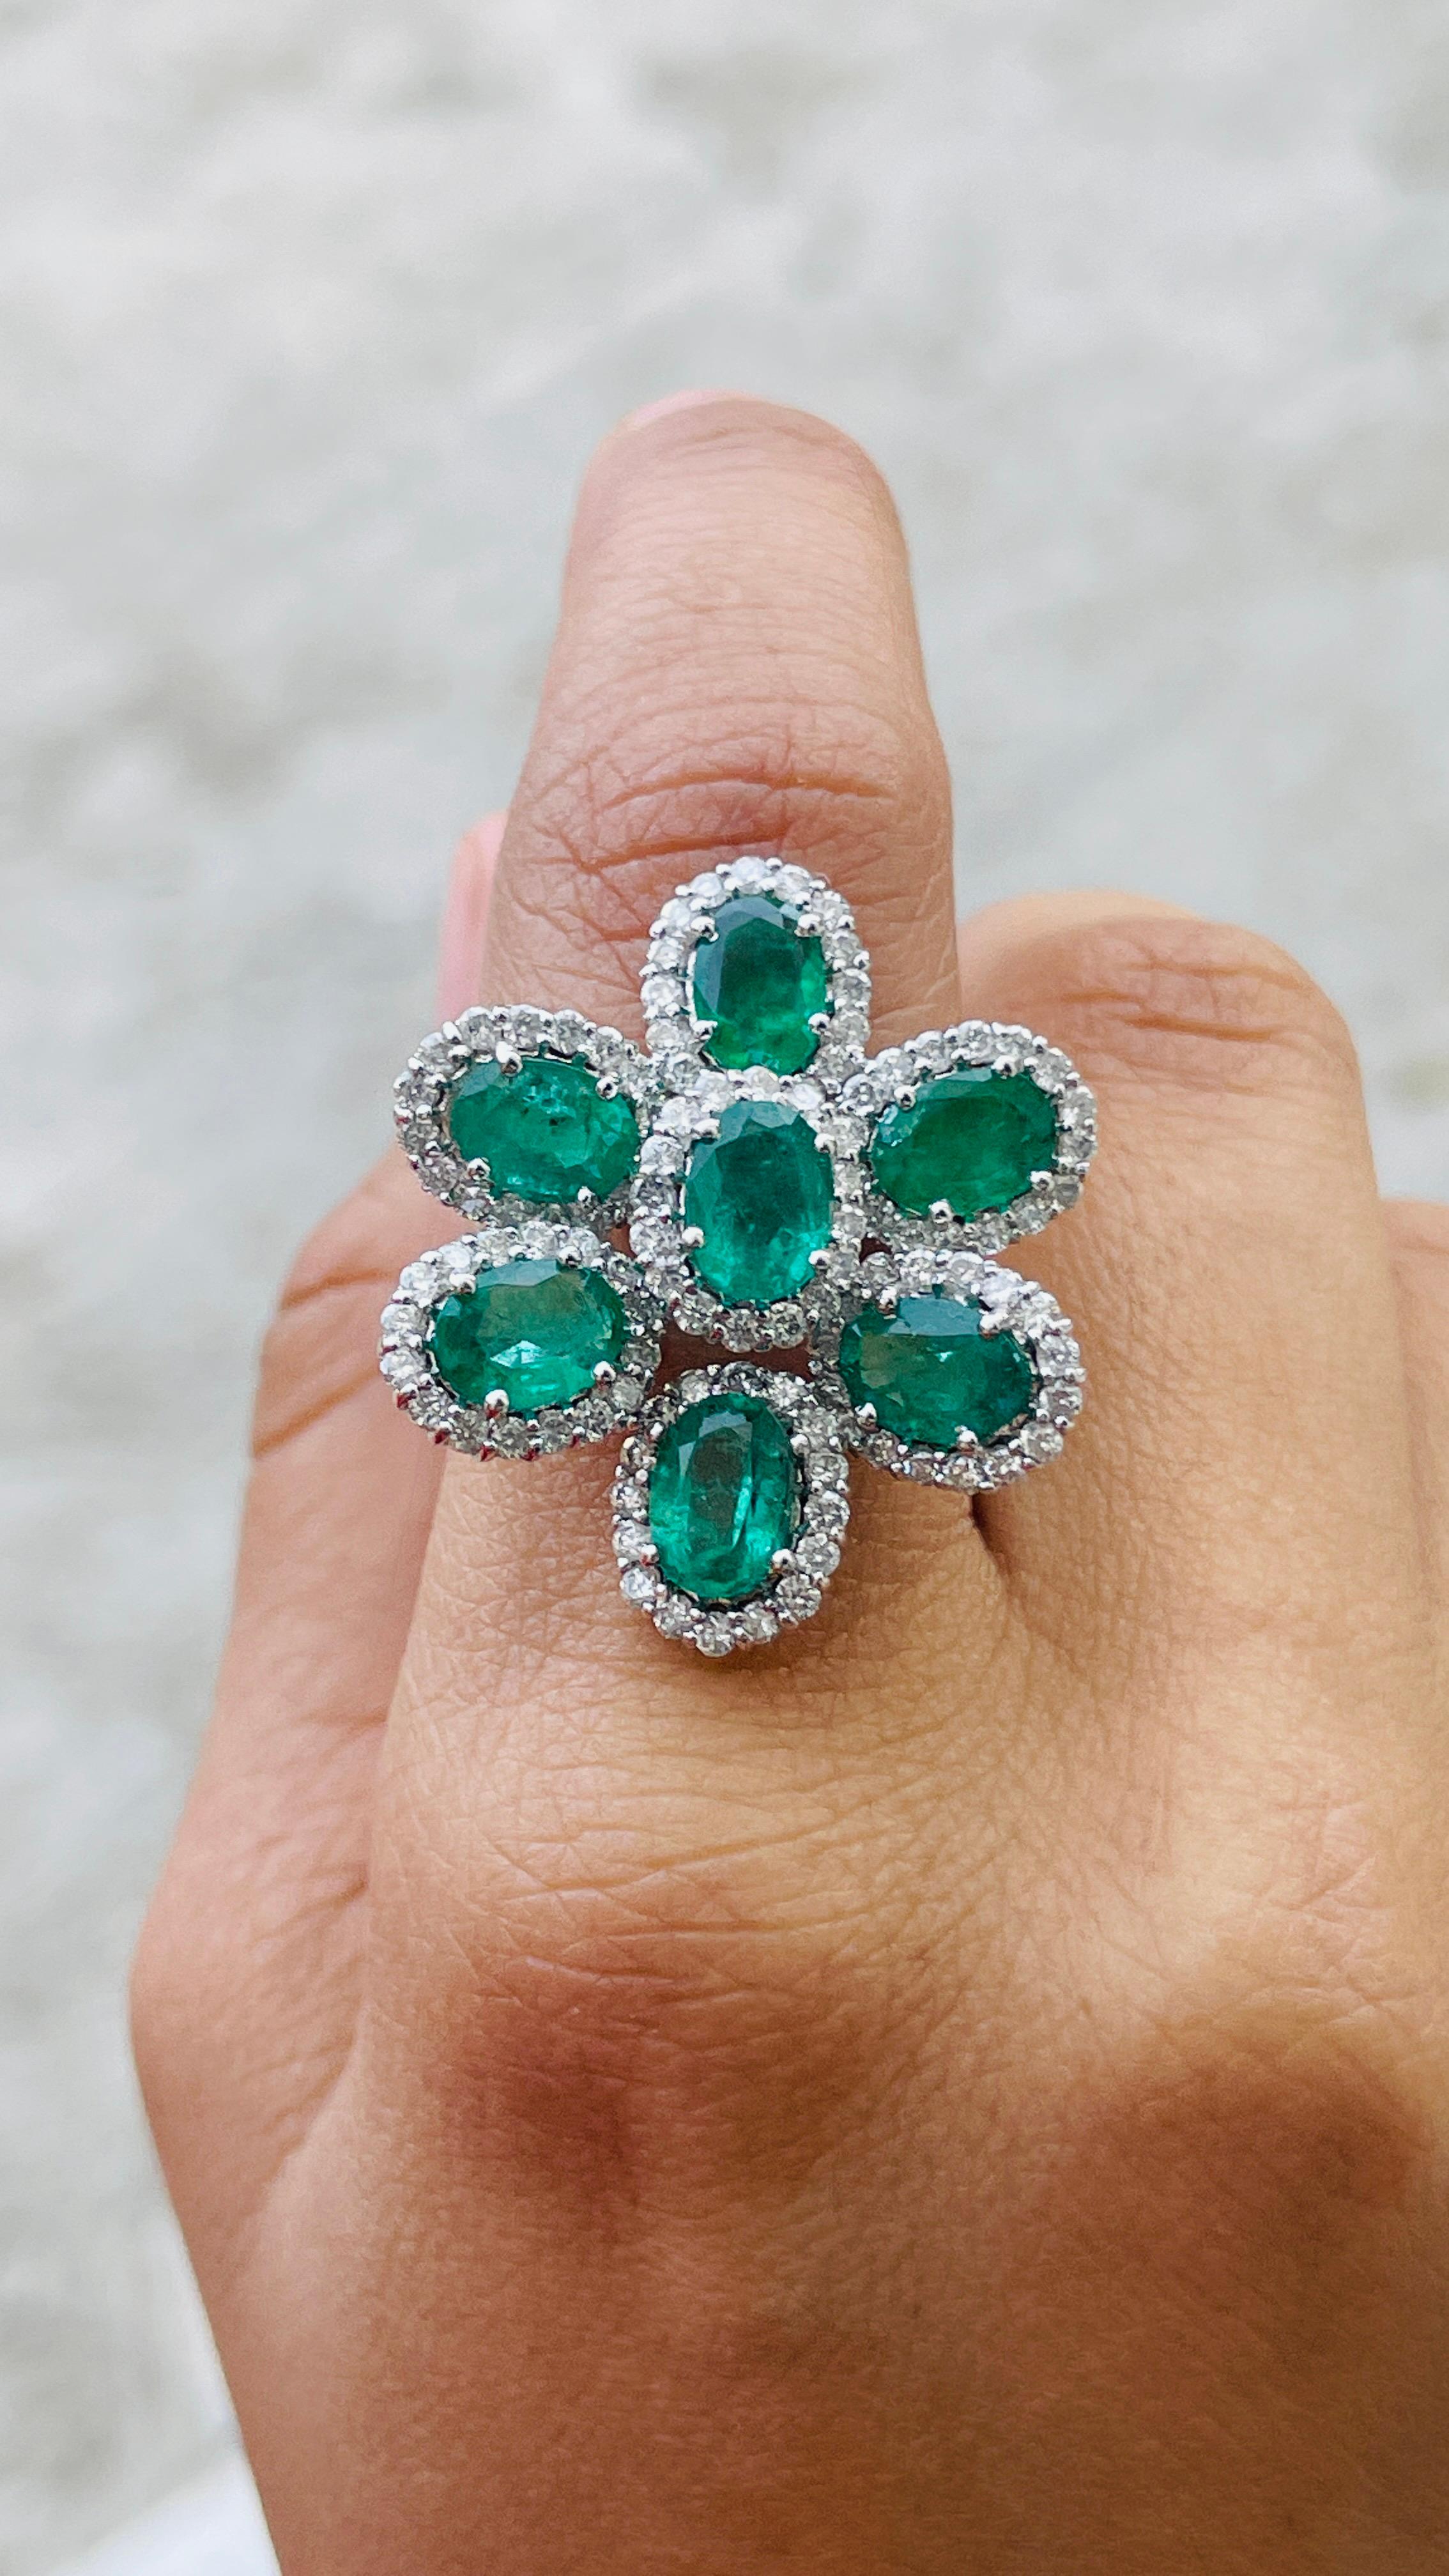 For Sale:  Statement 5 ct Emerald Flower Ring with Halo Diamonds in 14 Karat White Gold 7